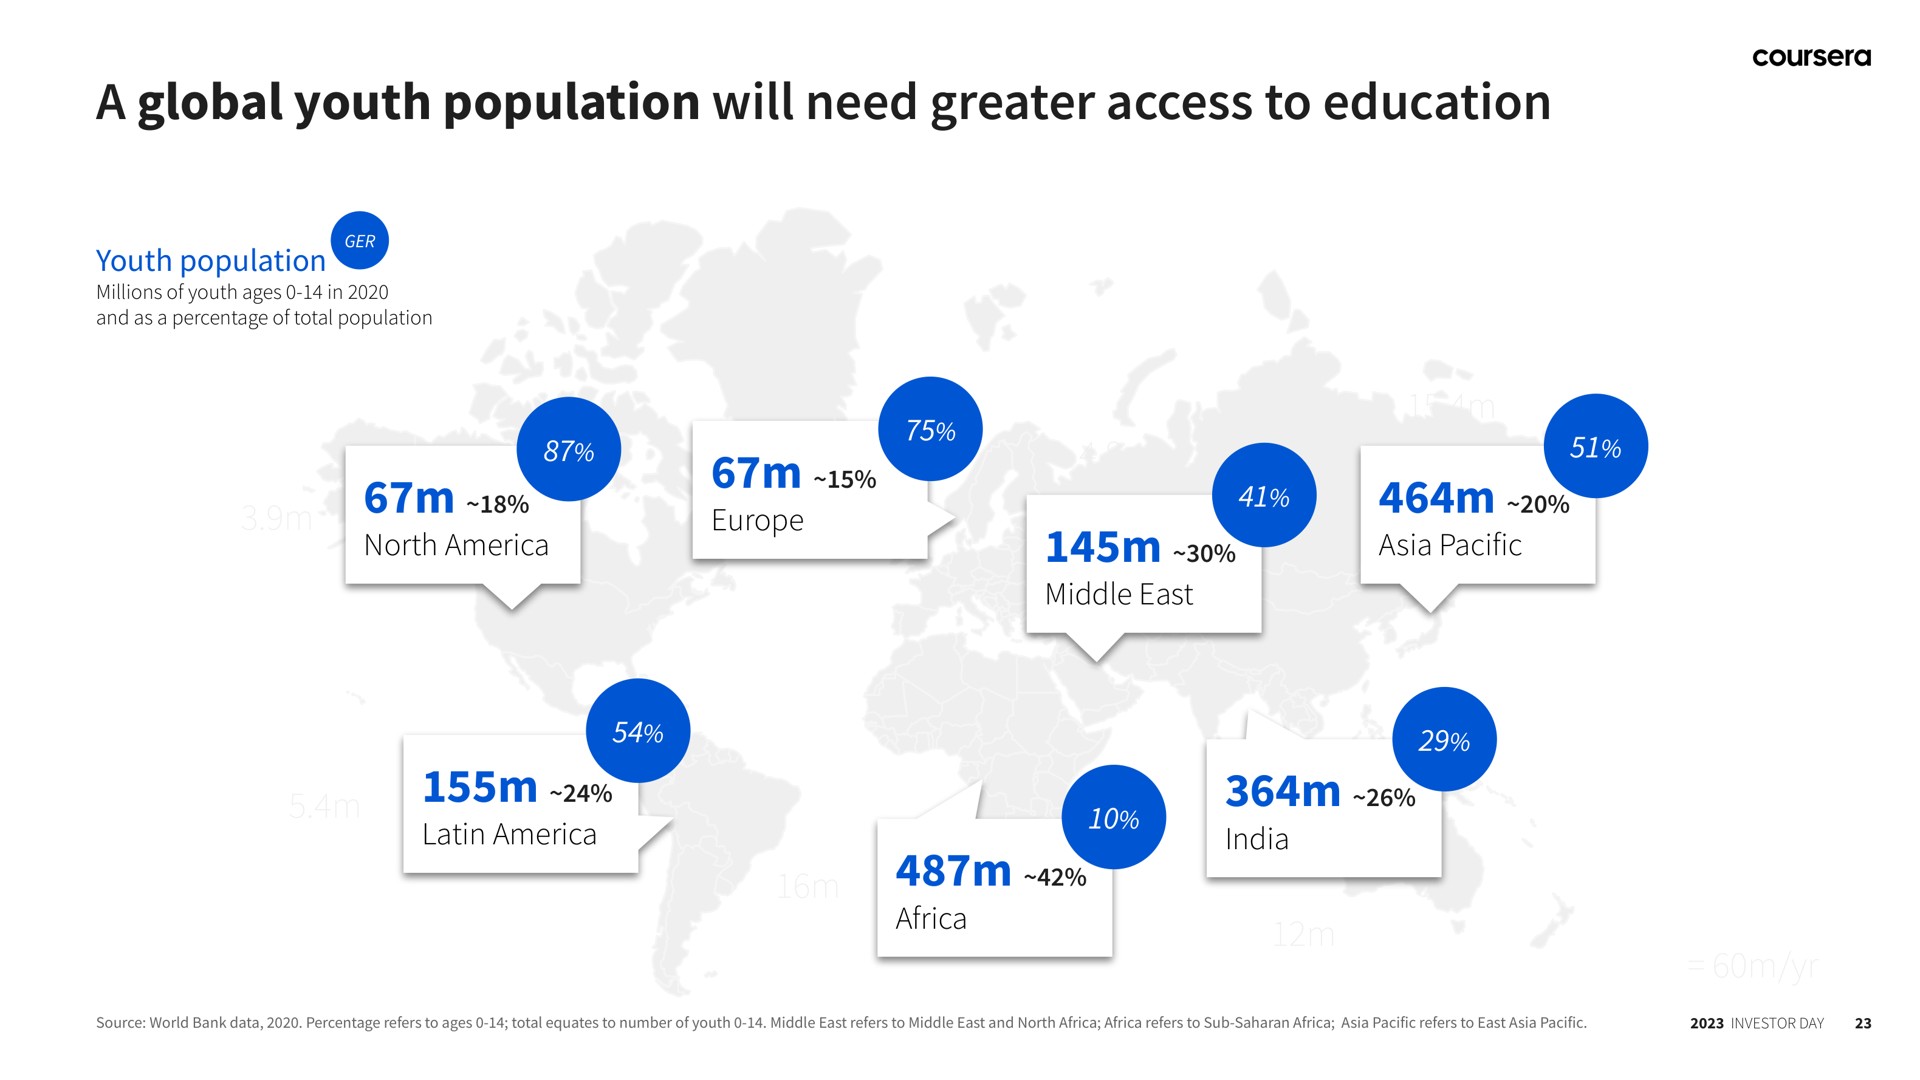 a global youth population will need greater access to education | Coursera